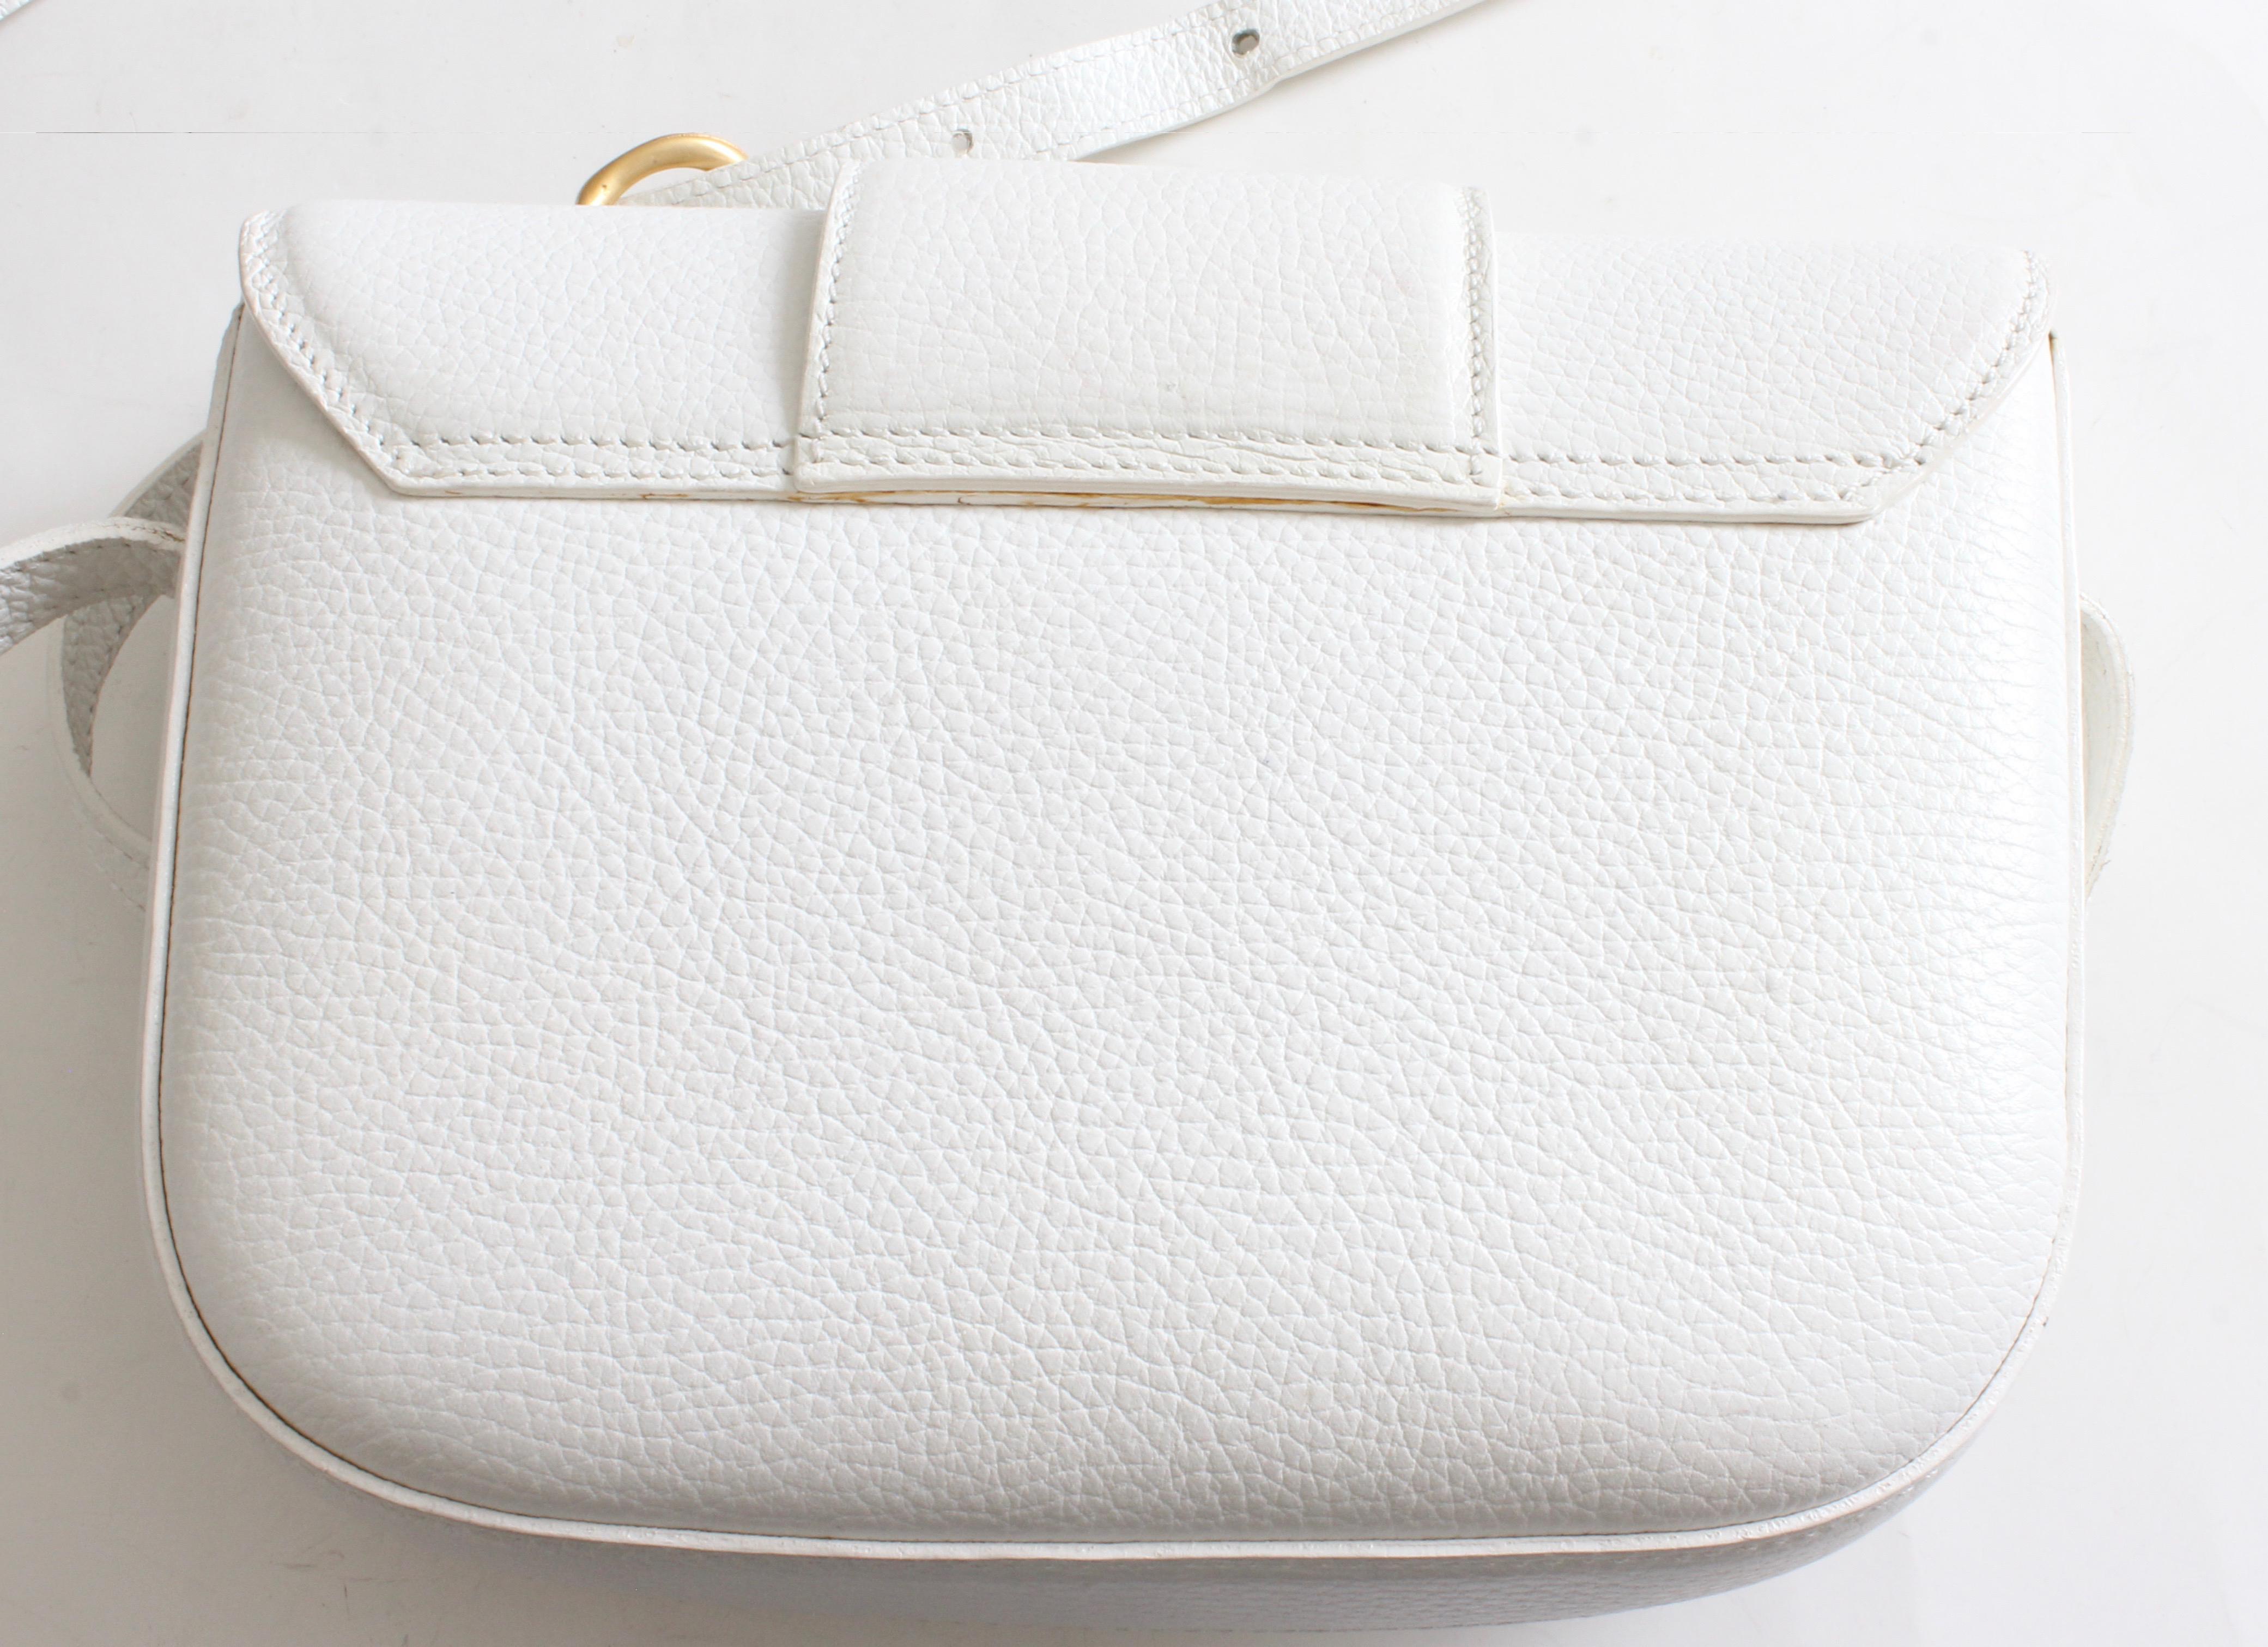 Bally Crossbody Bag White Pebbled Leather Top Flap Shoulder Bag Italy Vintage For Sale 1